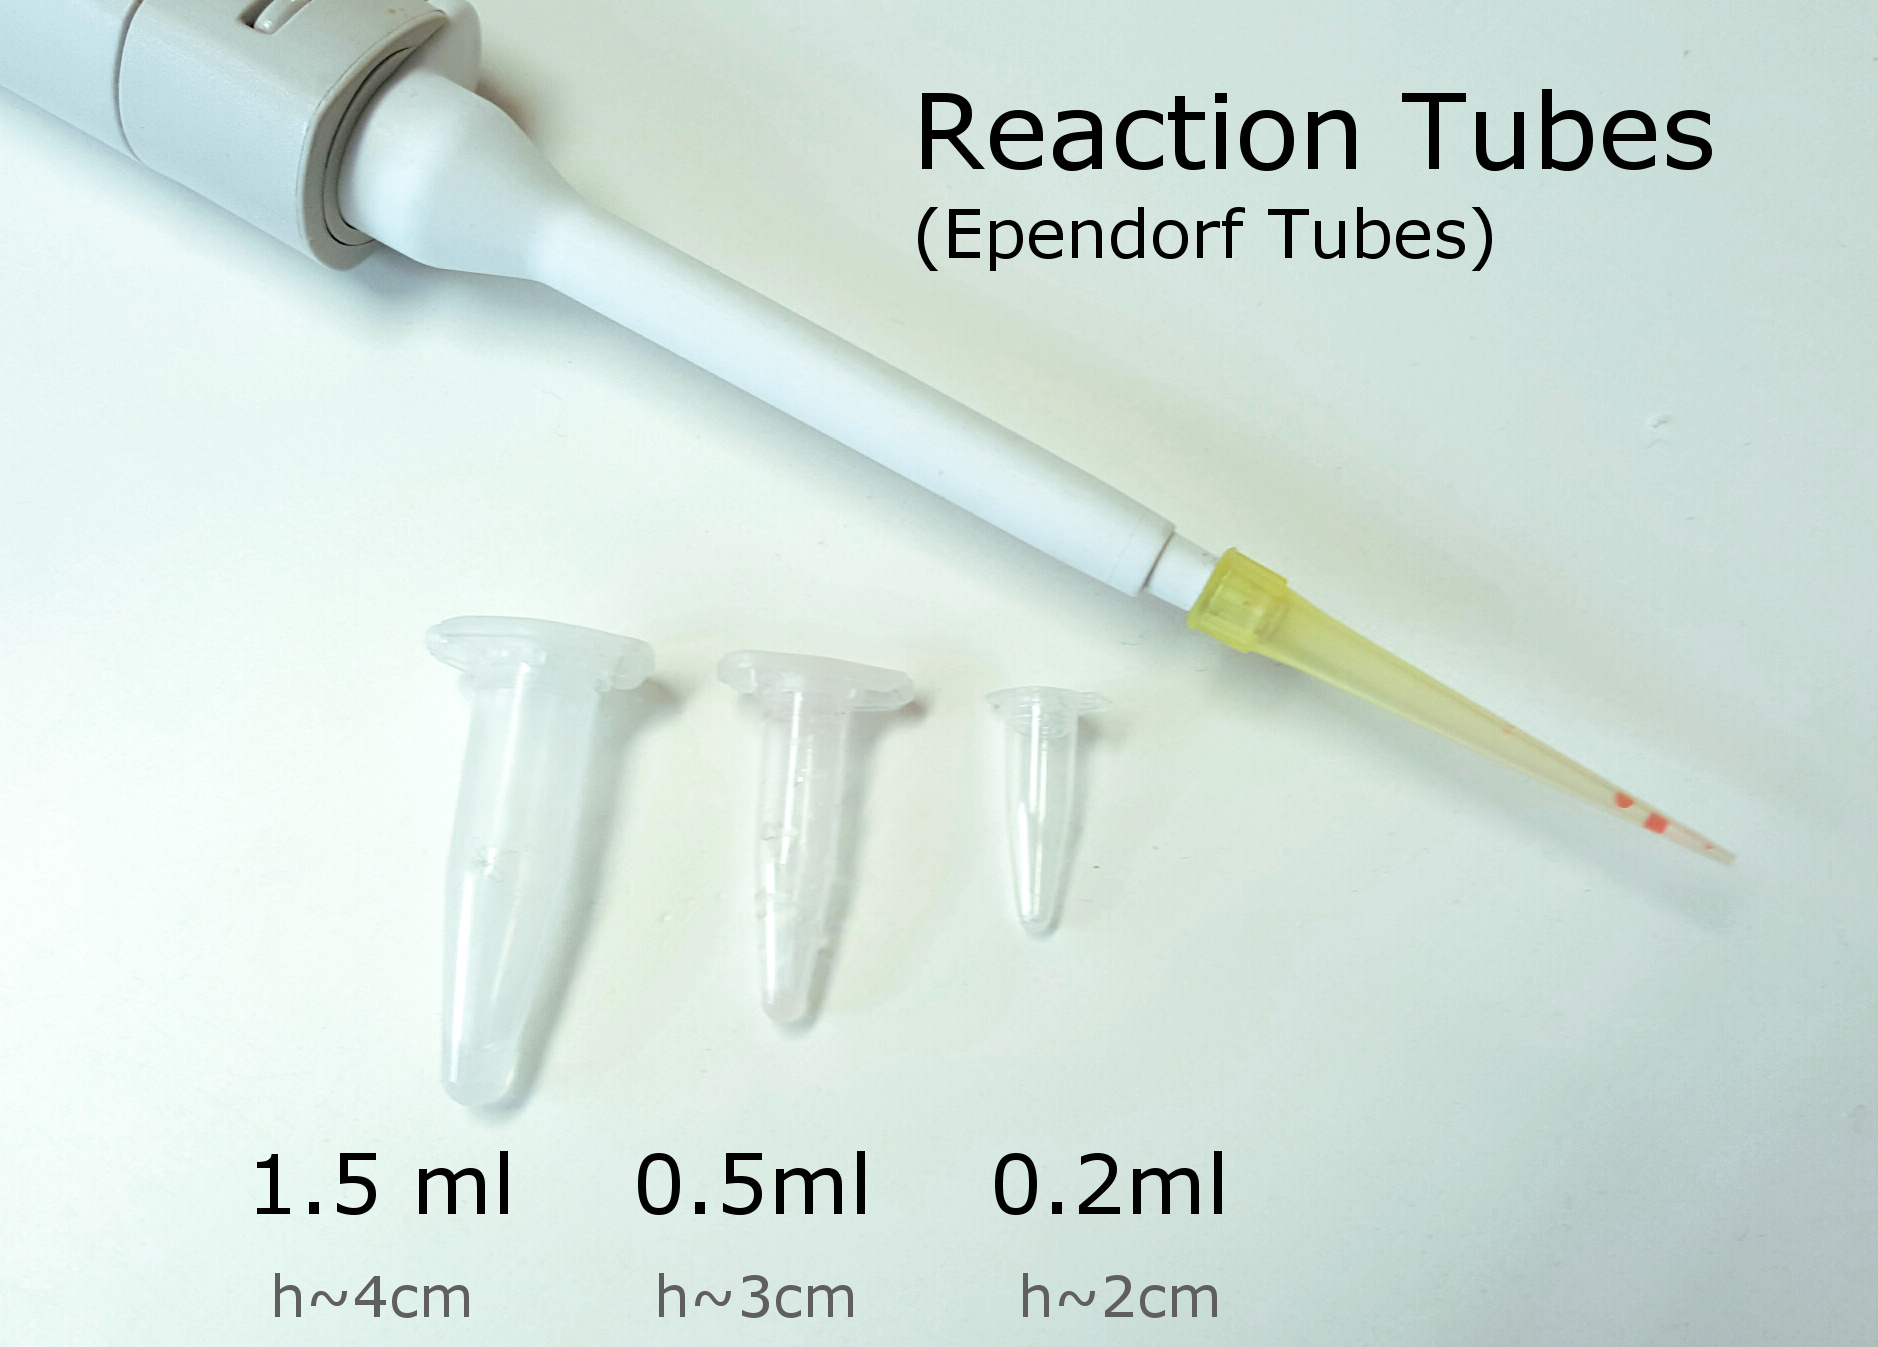 What volume eppendorf tubes are there